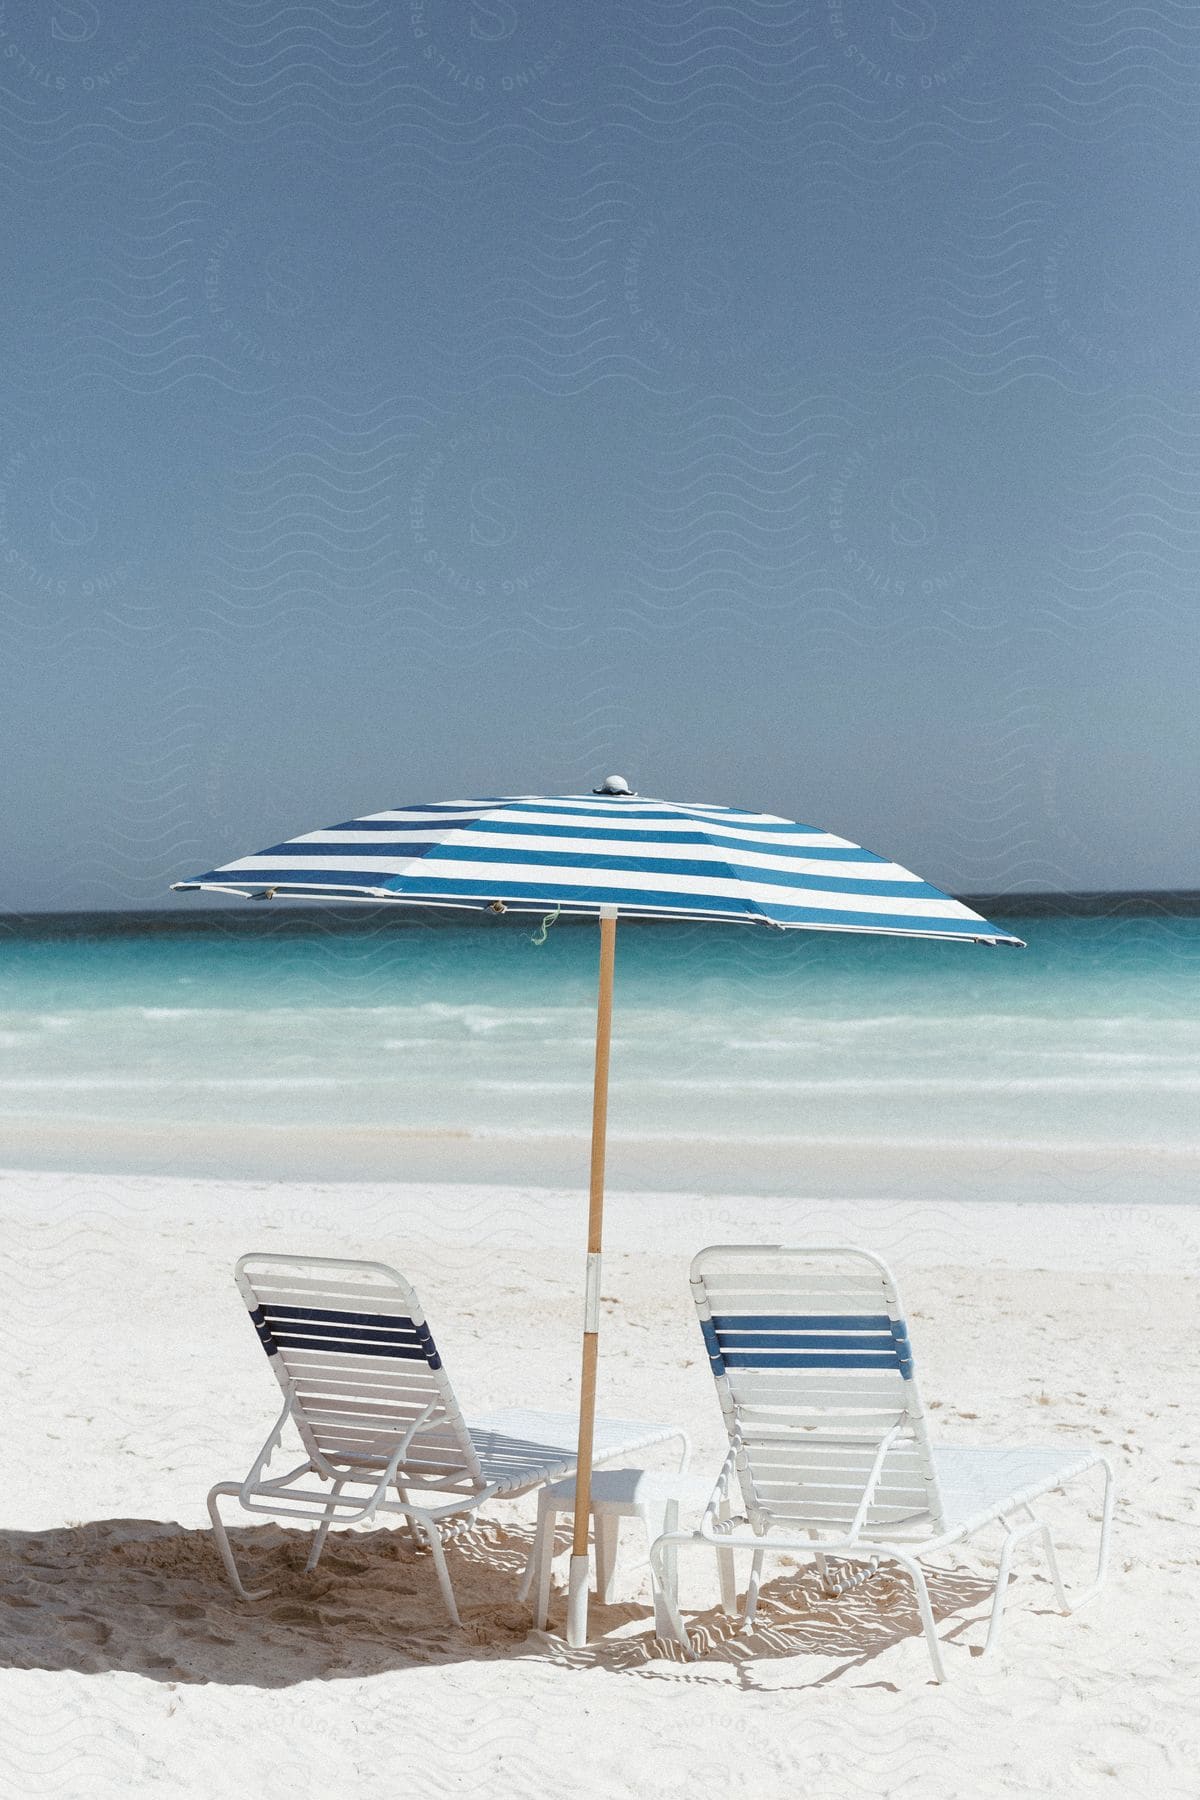 Two blue and white striped chairs and an umbrella arranged on the beach